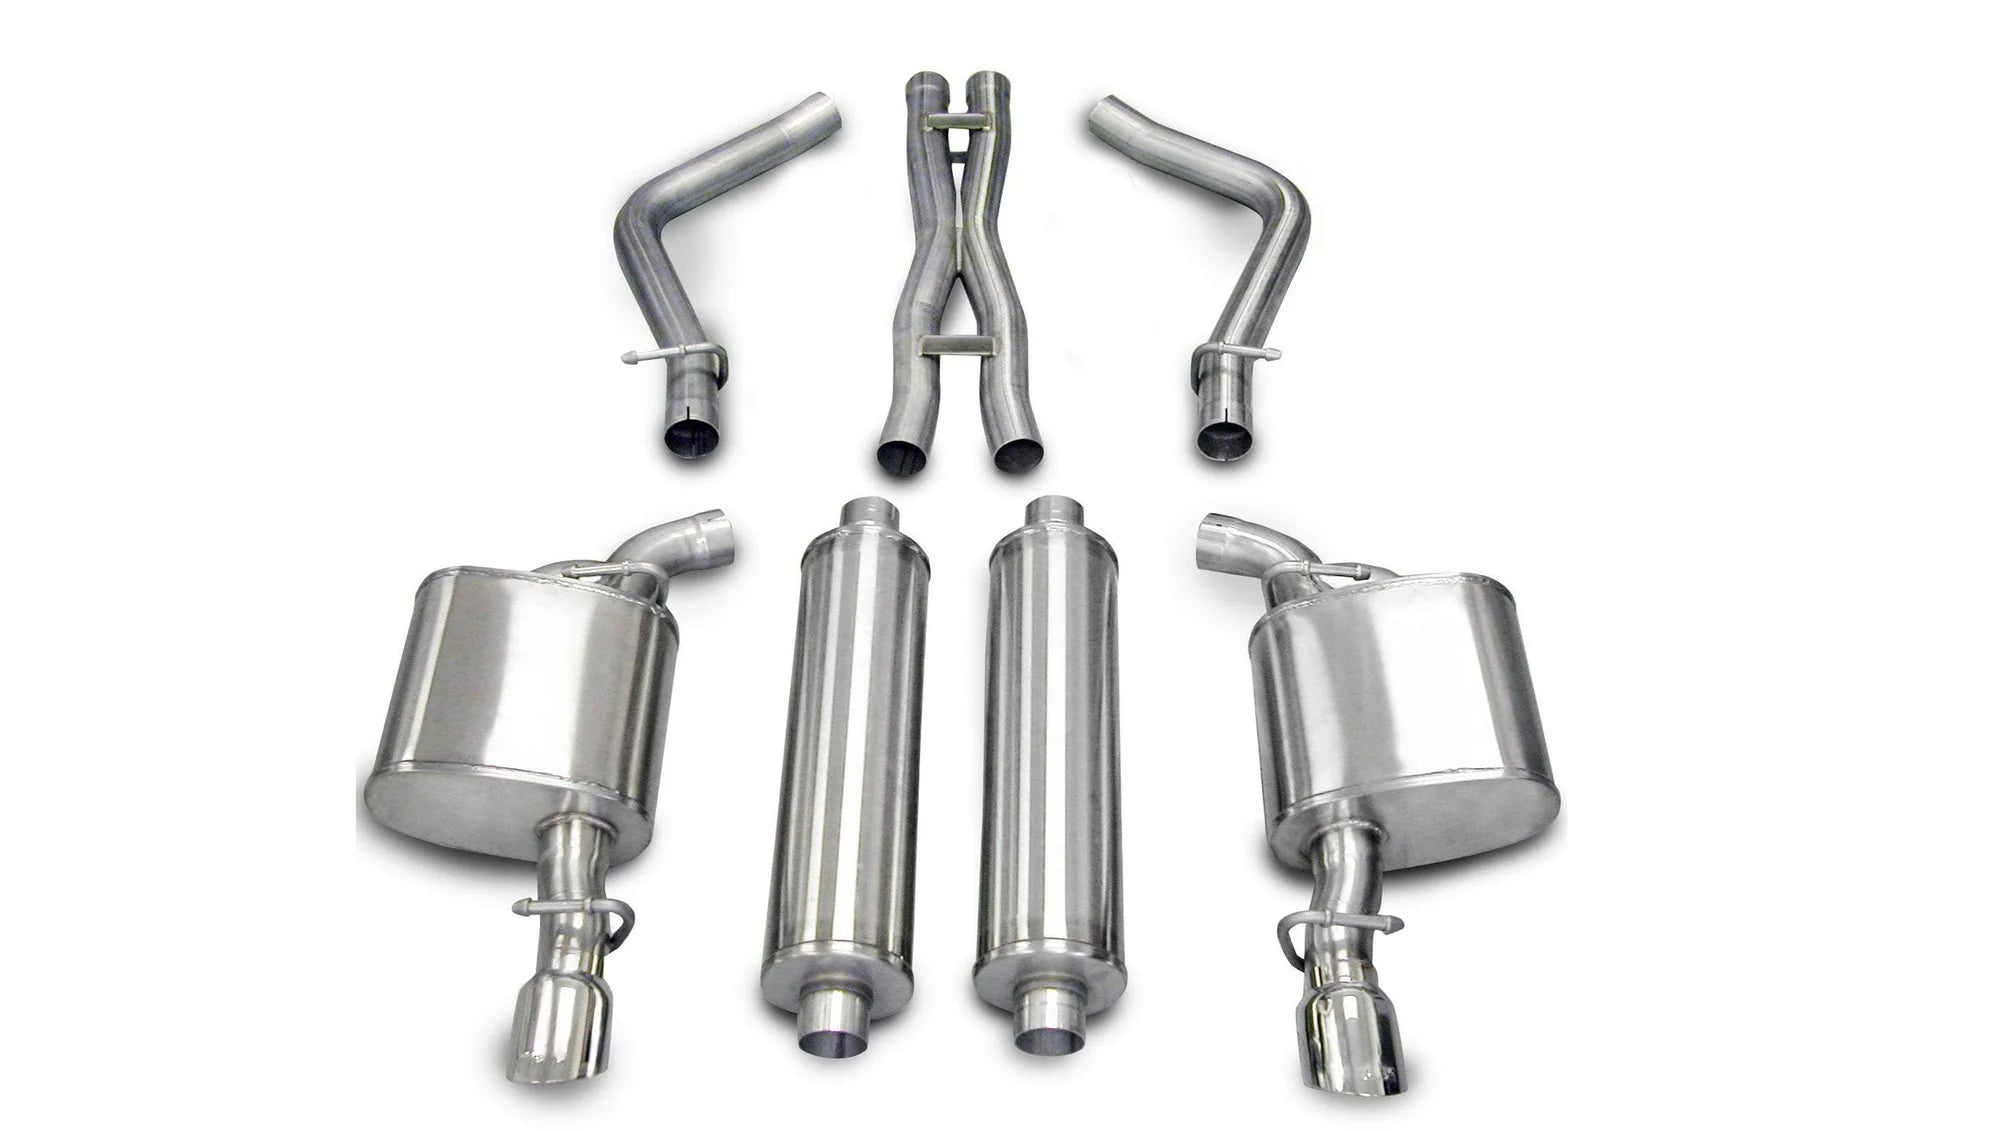 Corsa 2005 - 2010 Dodge Charger / Chrysler 300 No Towing Hitch R/T 5.7L V8 Polished Xtreme Cat-Back Exhaust